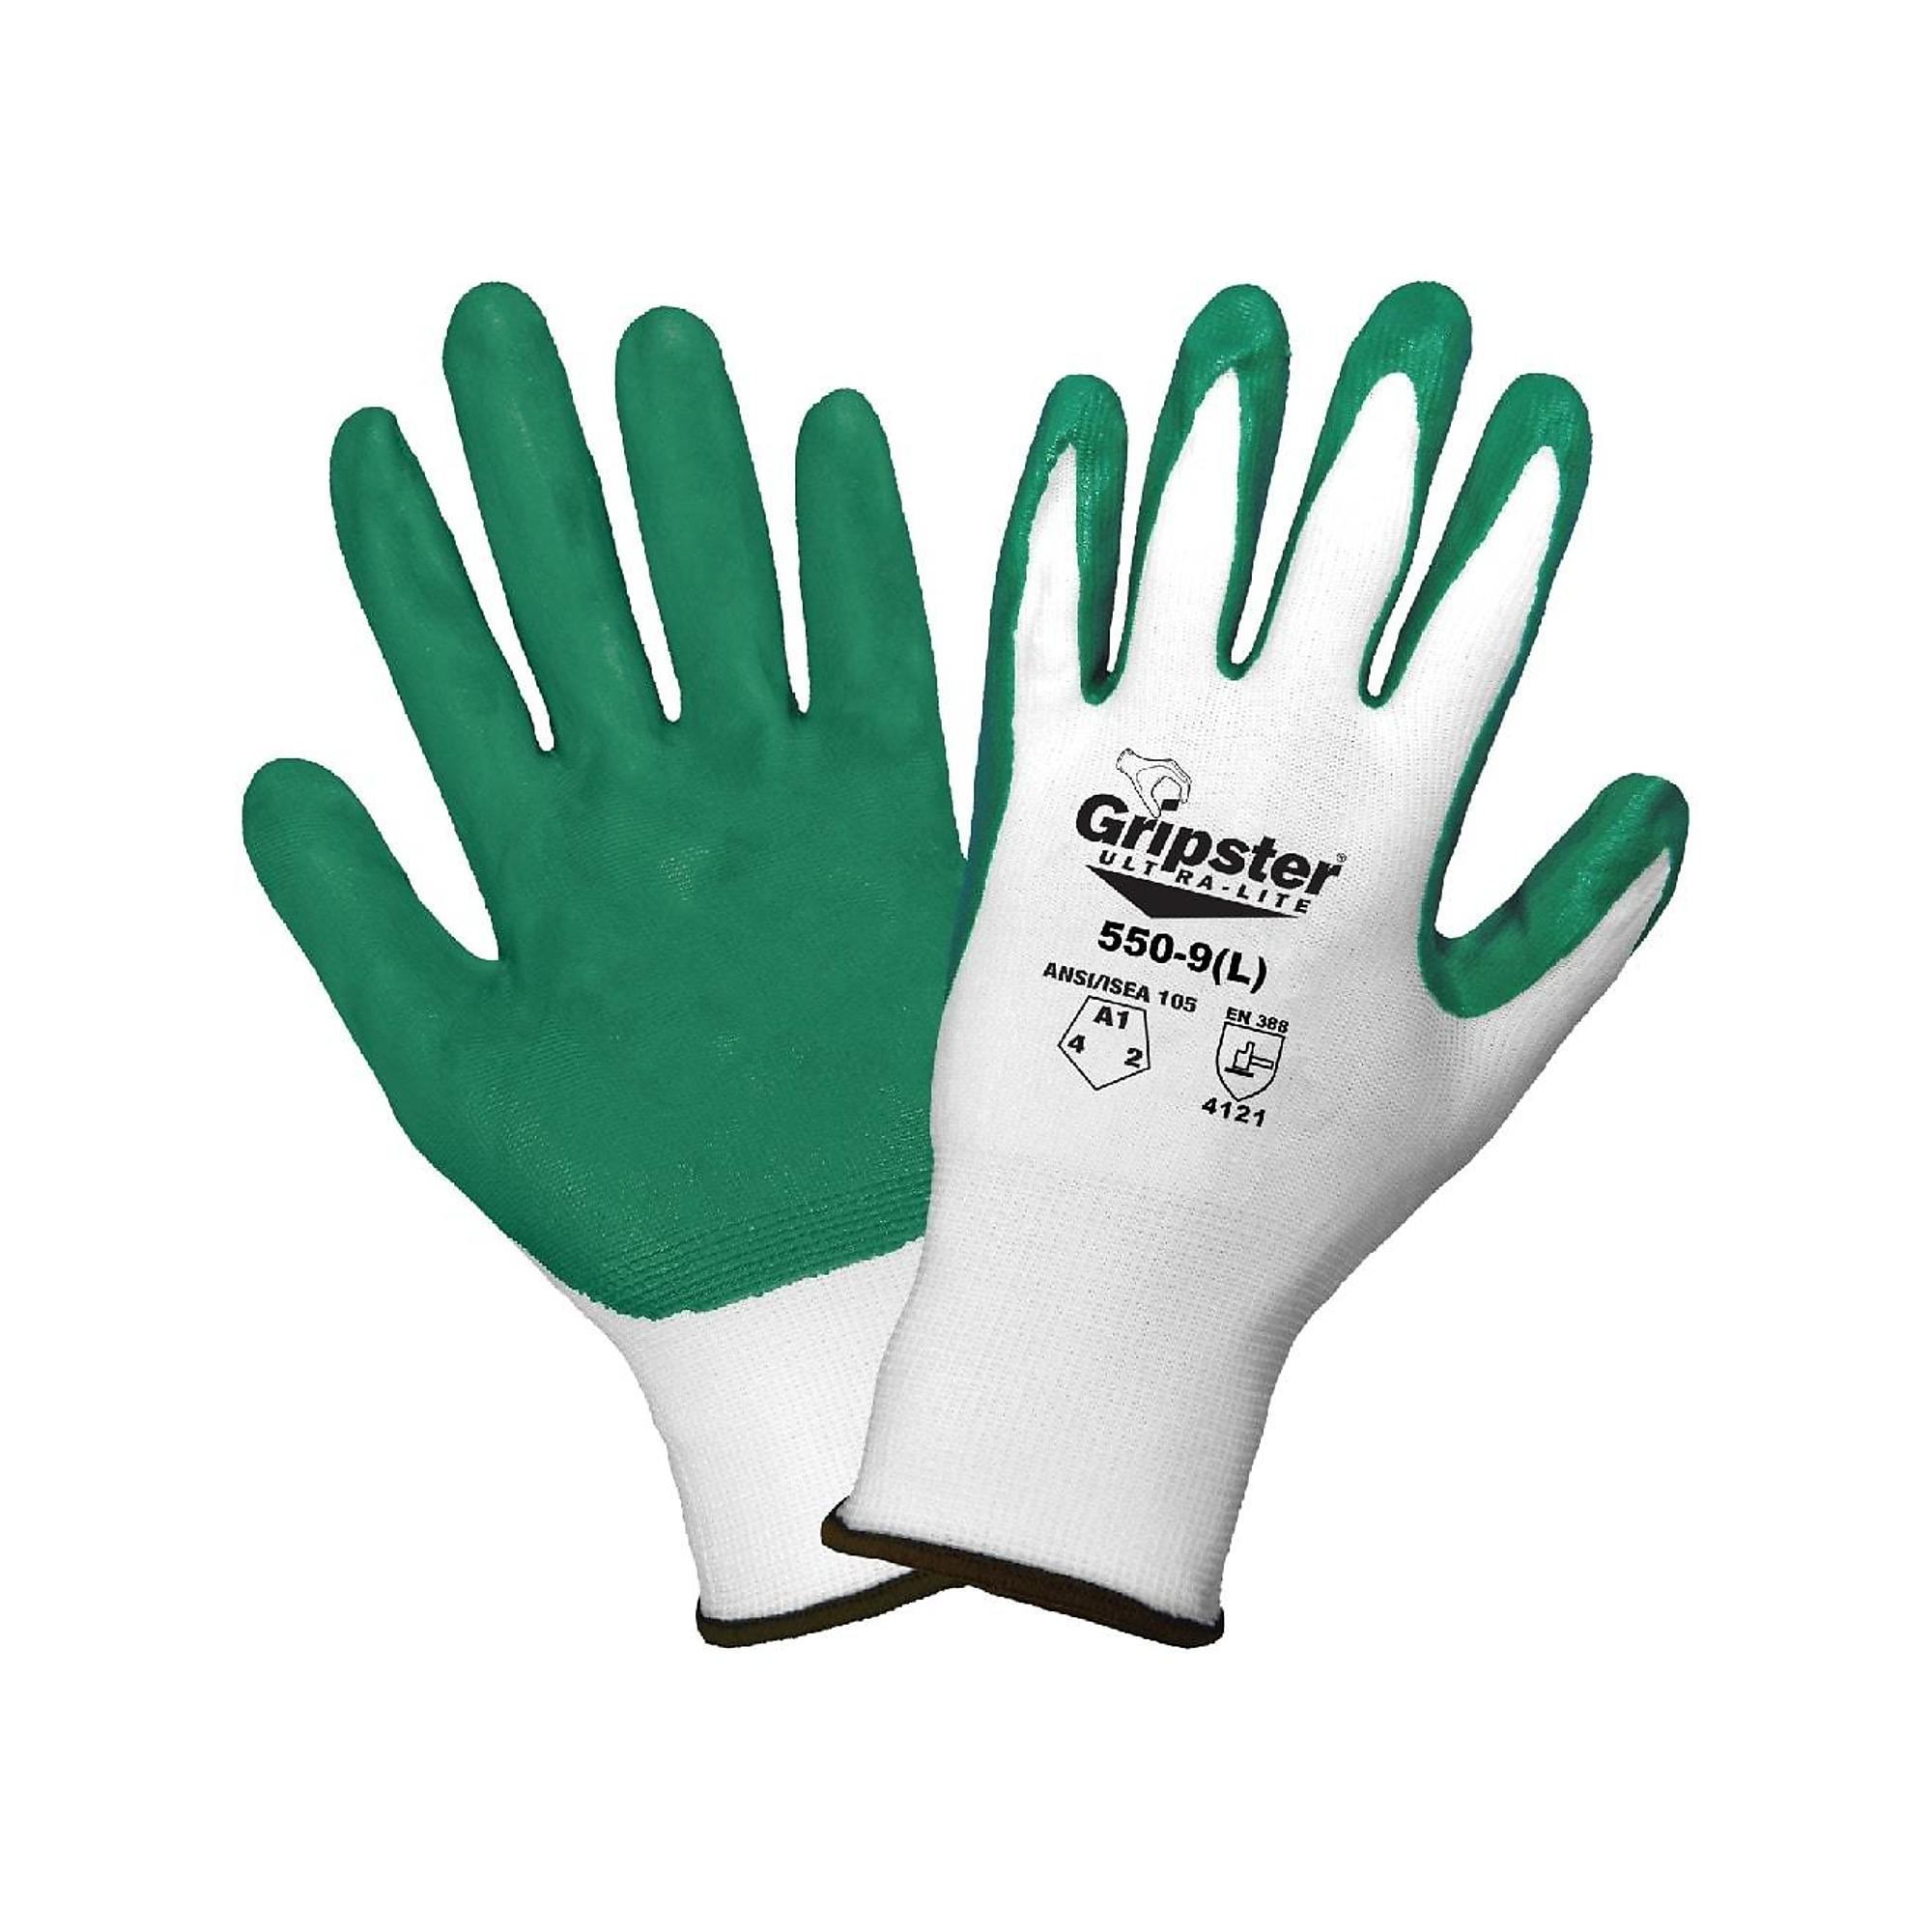 Global Glove Gripster , Solid Nitrile Coated Nylon Gloves - 12 Pairs, Size S, Color White/Green, Included (qty.) 12 Model 550-7(S)